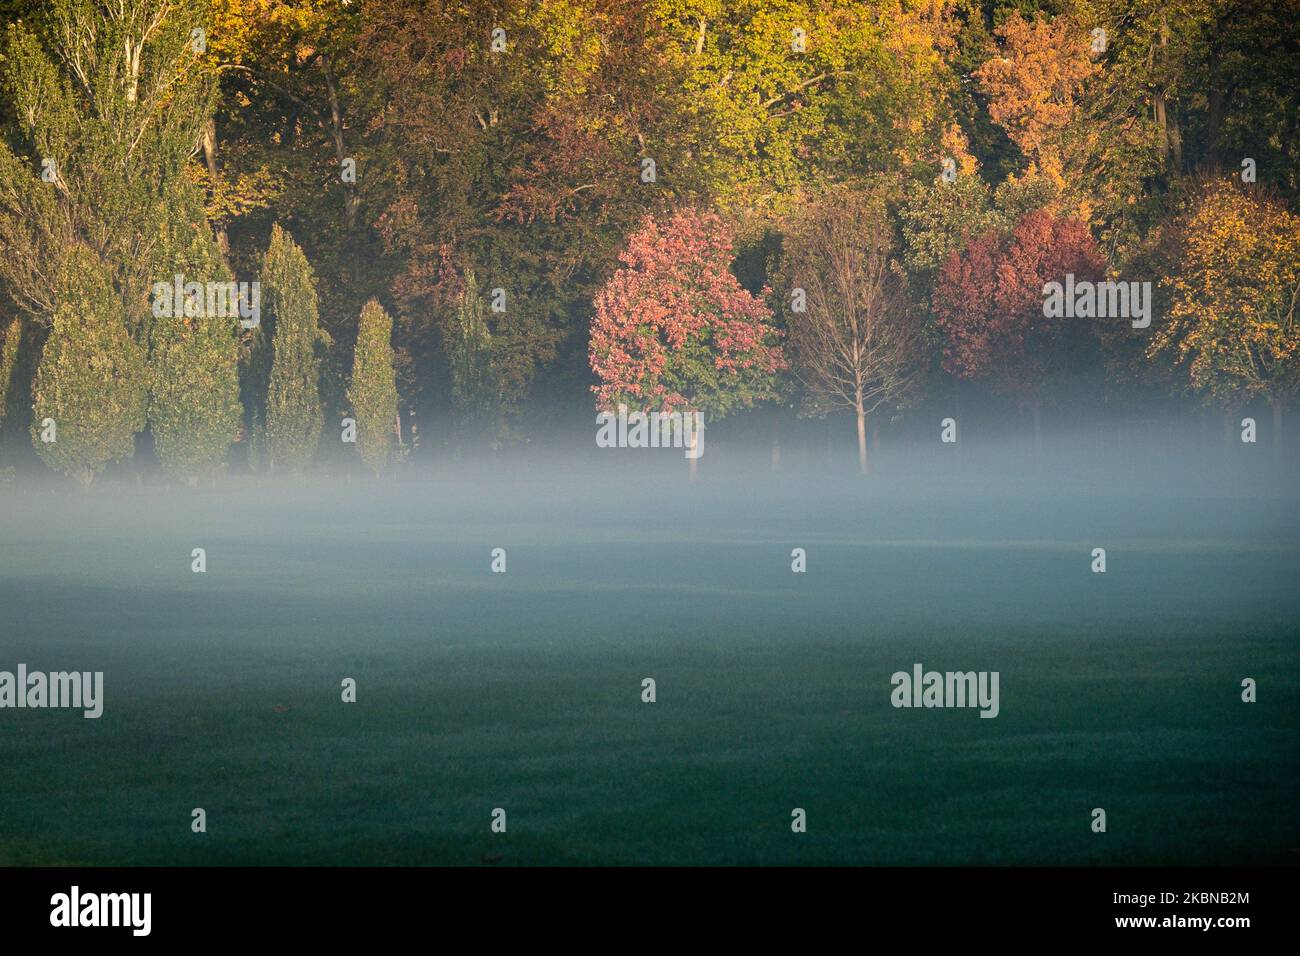 France, Lyon, 2022-10-19. A misty morning in a park with autumn coloured trees. Stock Photo